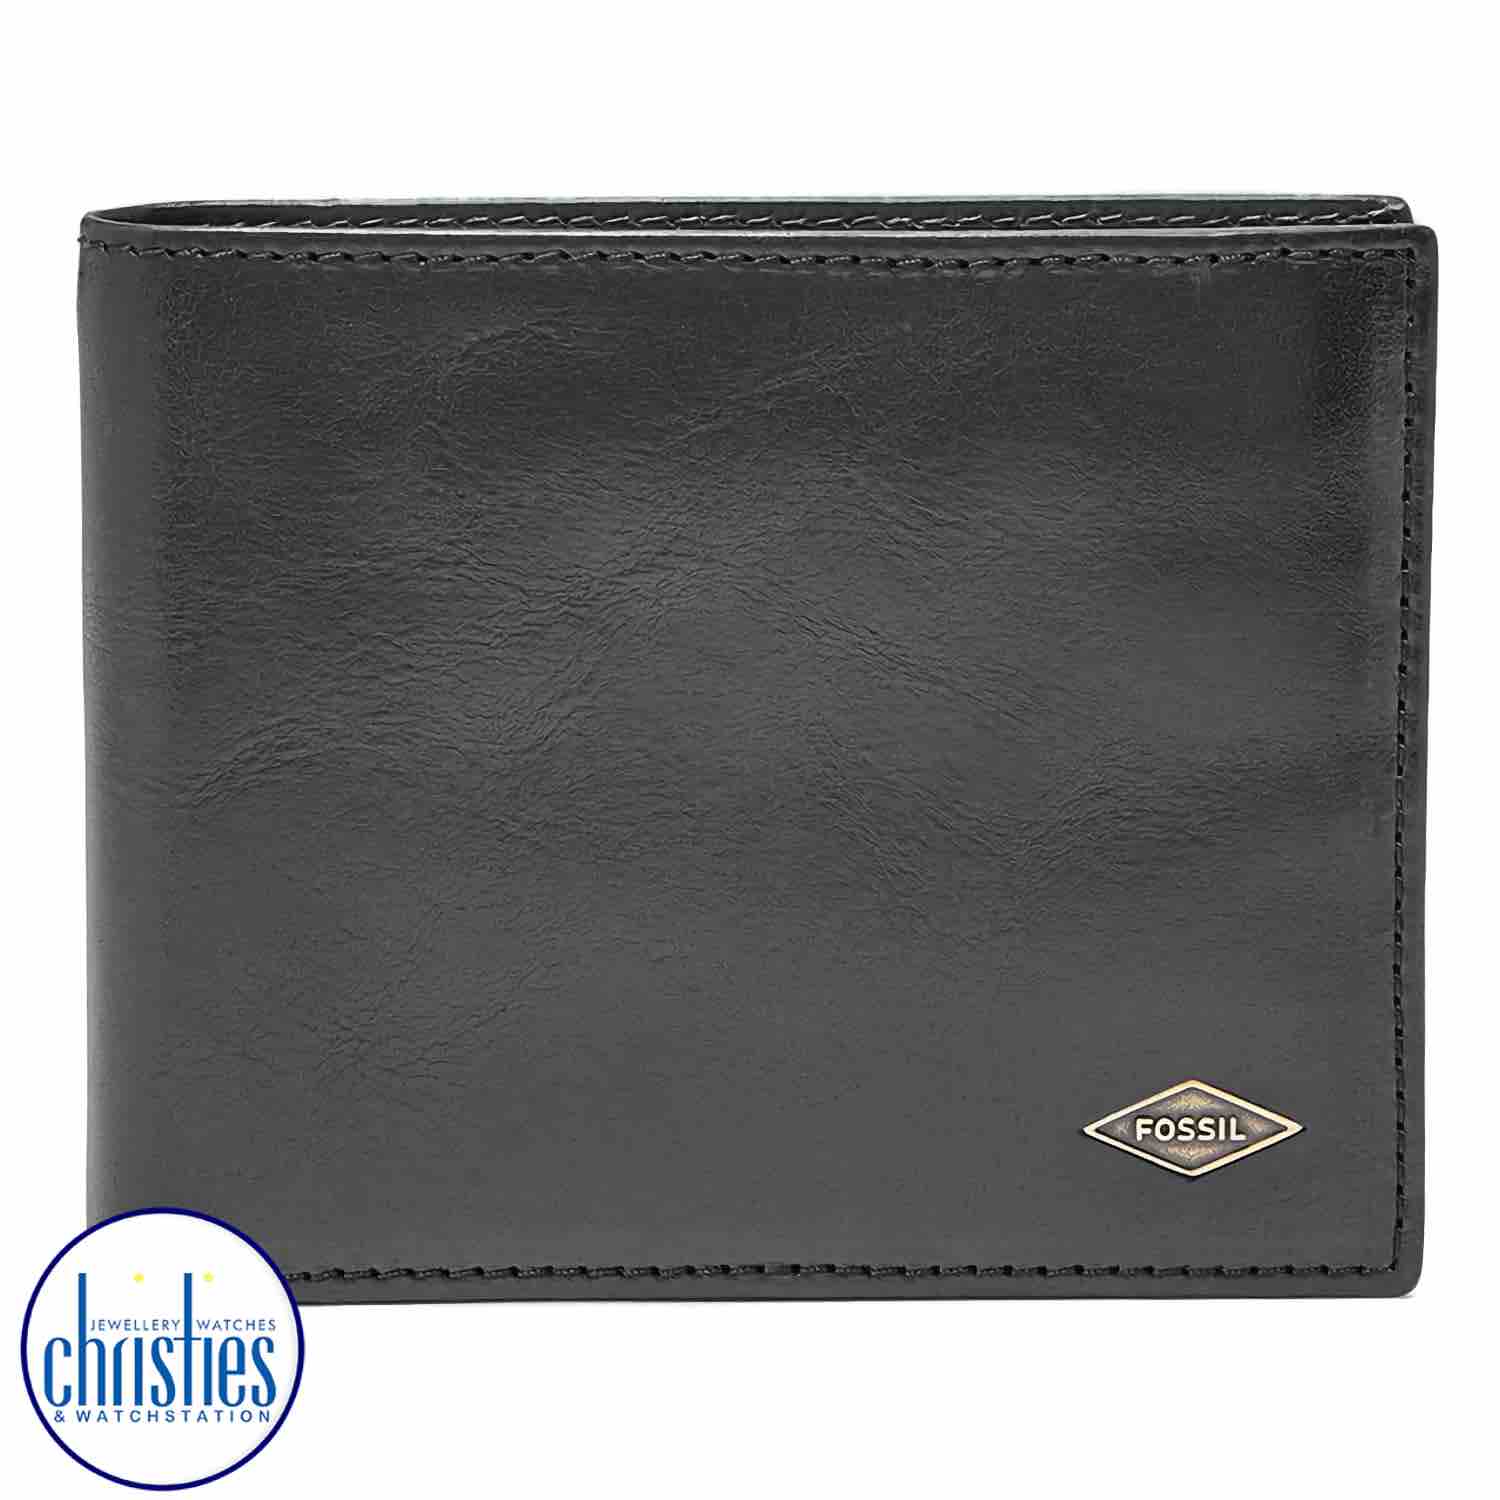 ML3729001 Fossil Ryan RFID Flip ID Bifold. This Fossil Bifold features RFID blocking protecting your contents from electric charges.